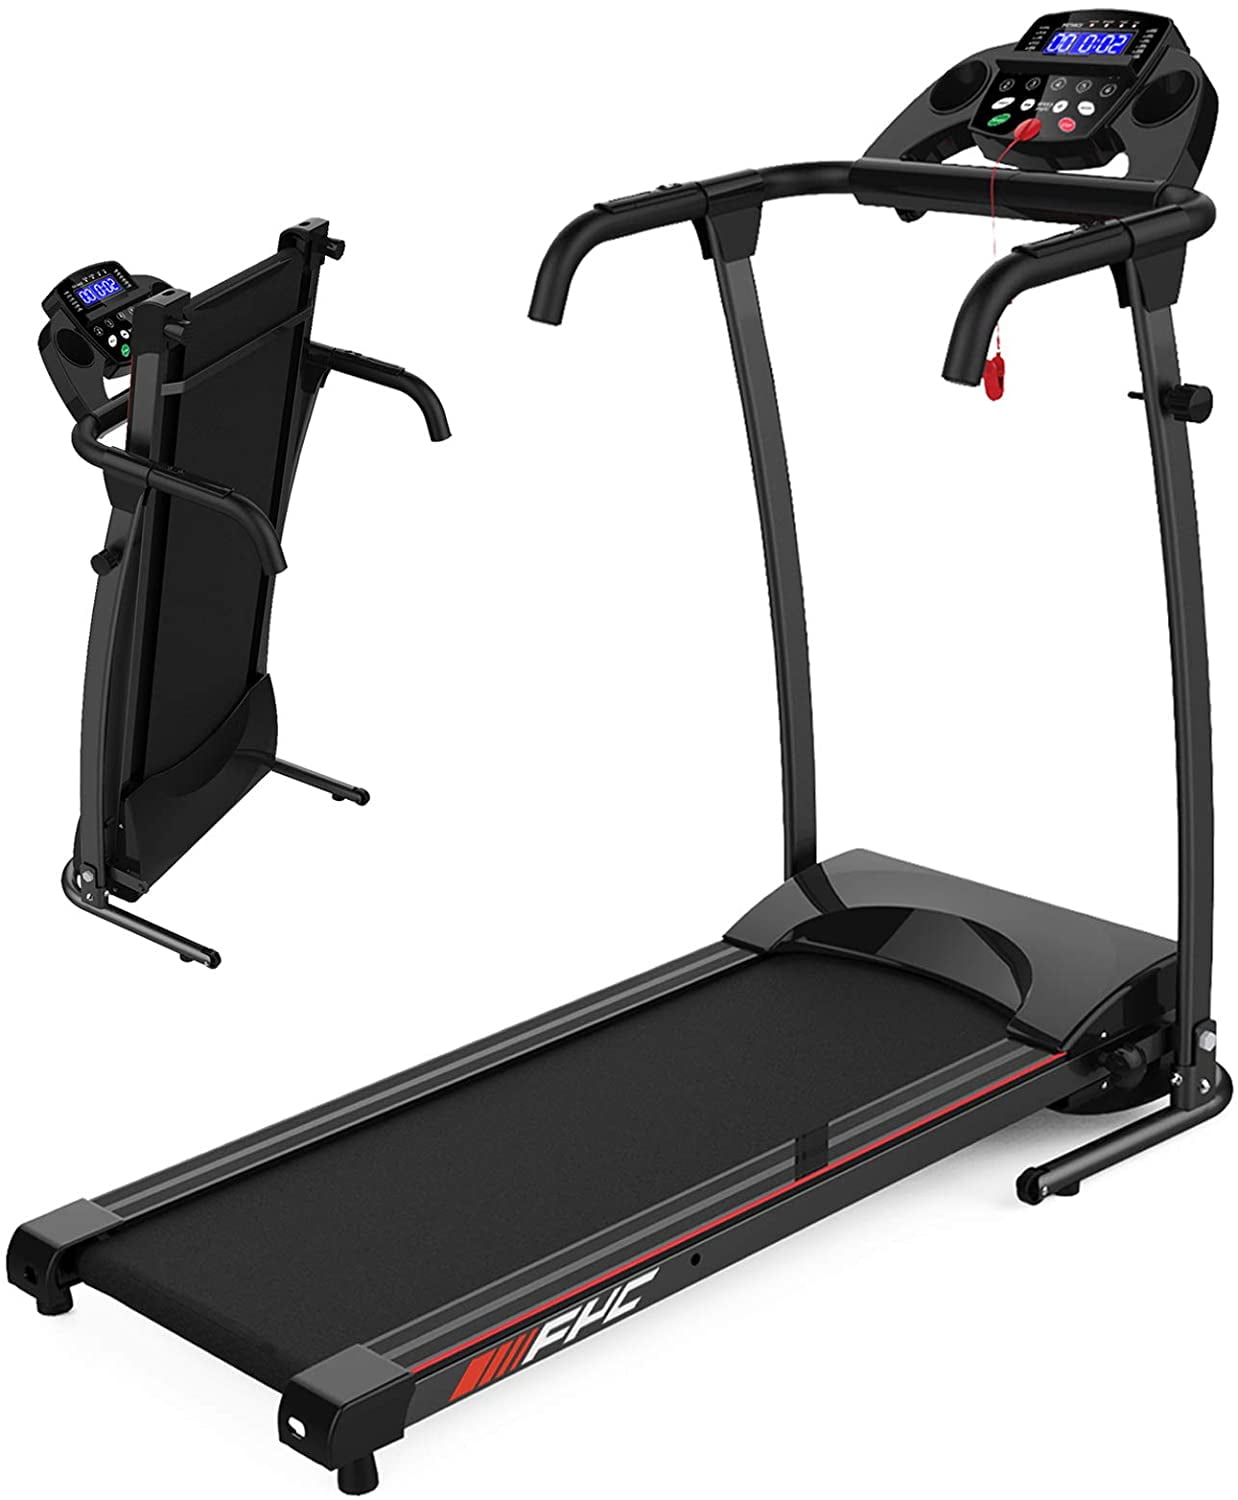 Details about   Folding Electric Treadmill Portable Motorized Machine Running Gym Fitness Home 